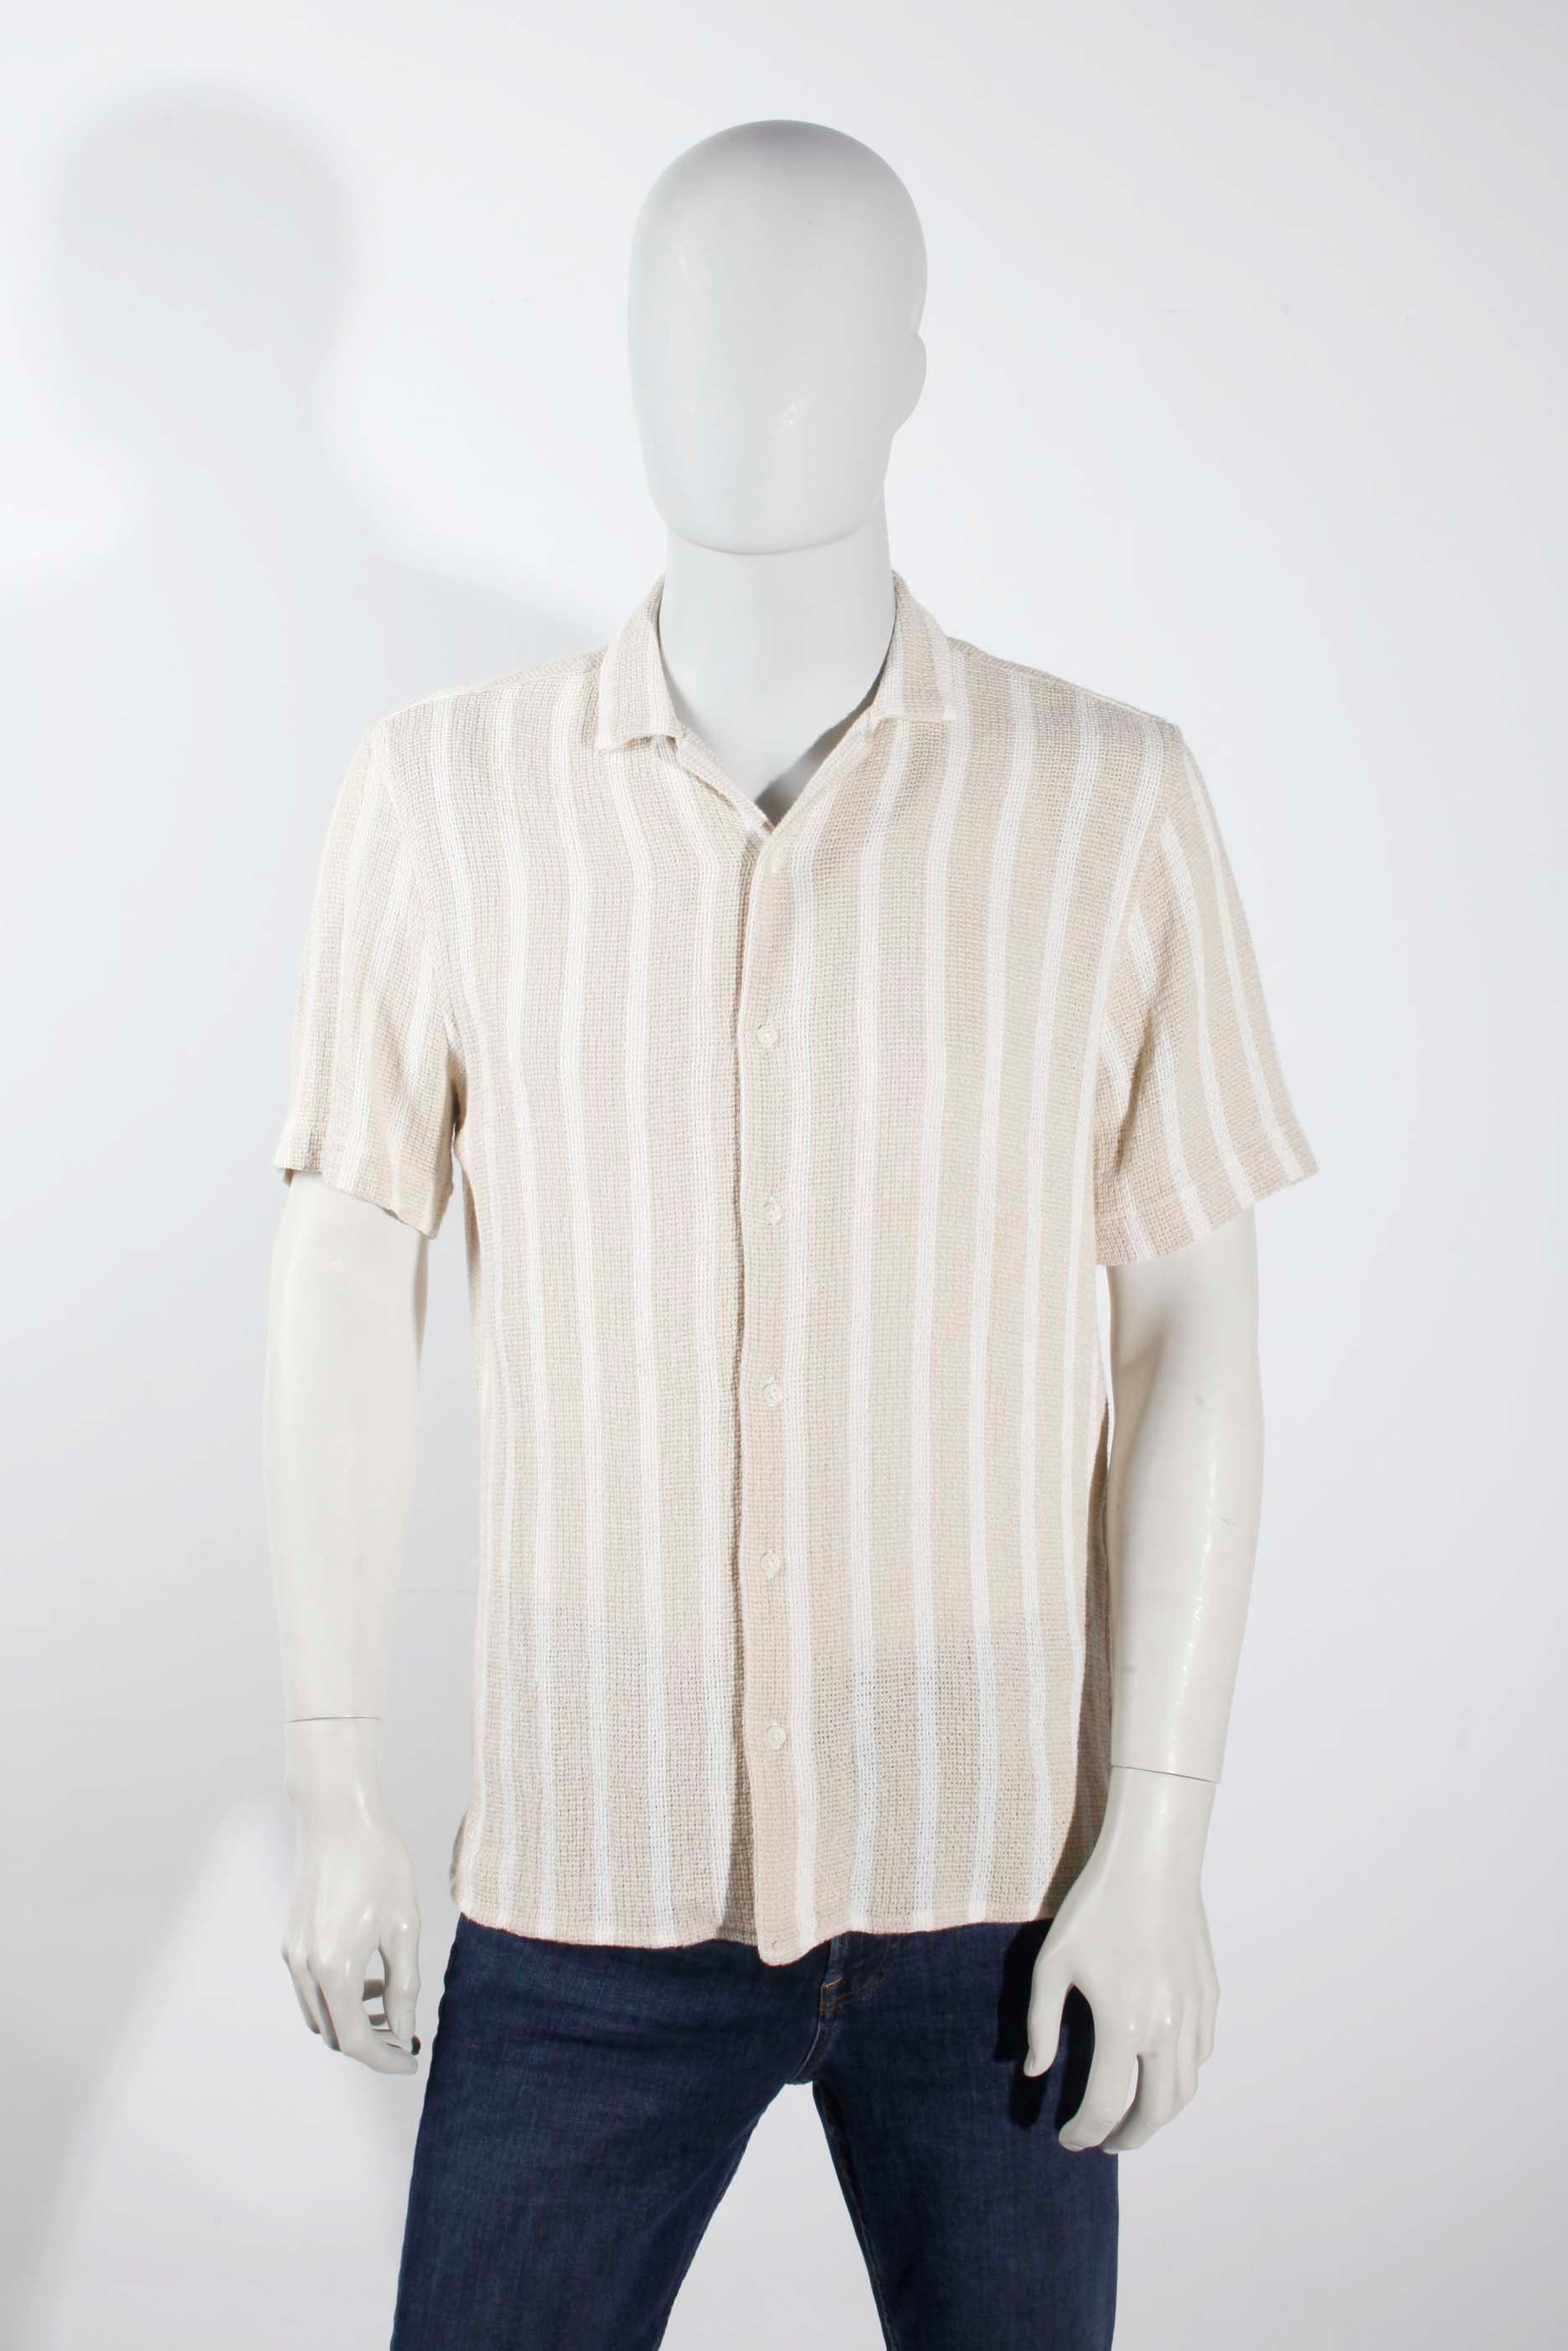 Mens Zara Knitted Beige and White Striped Shirt (Large)